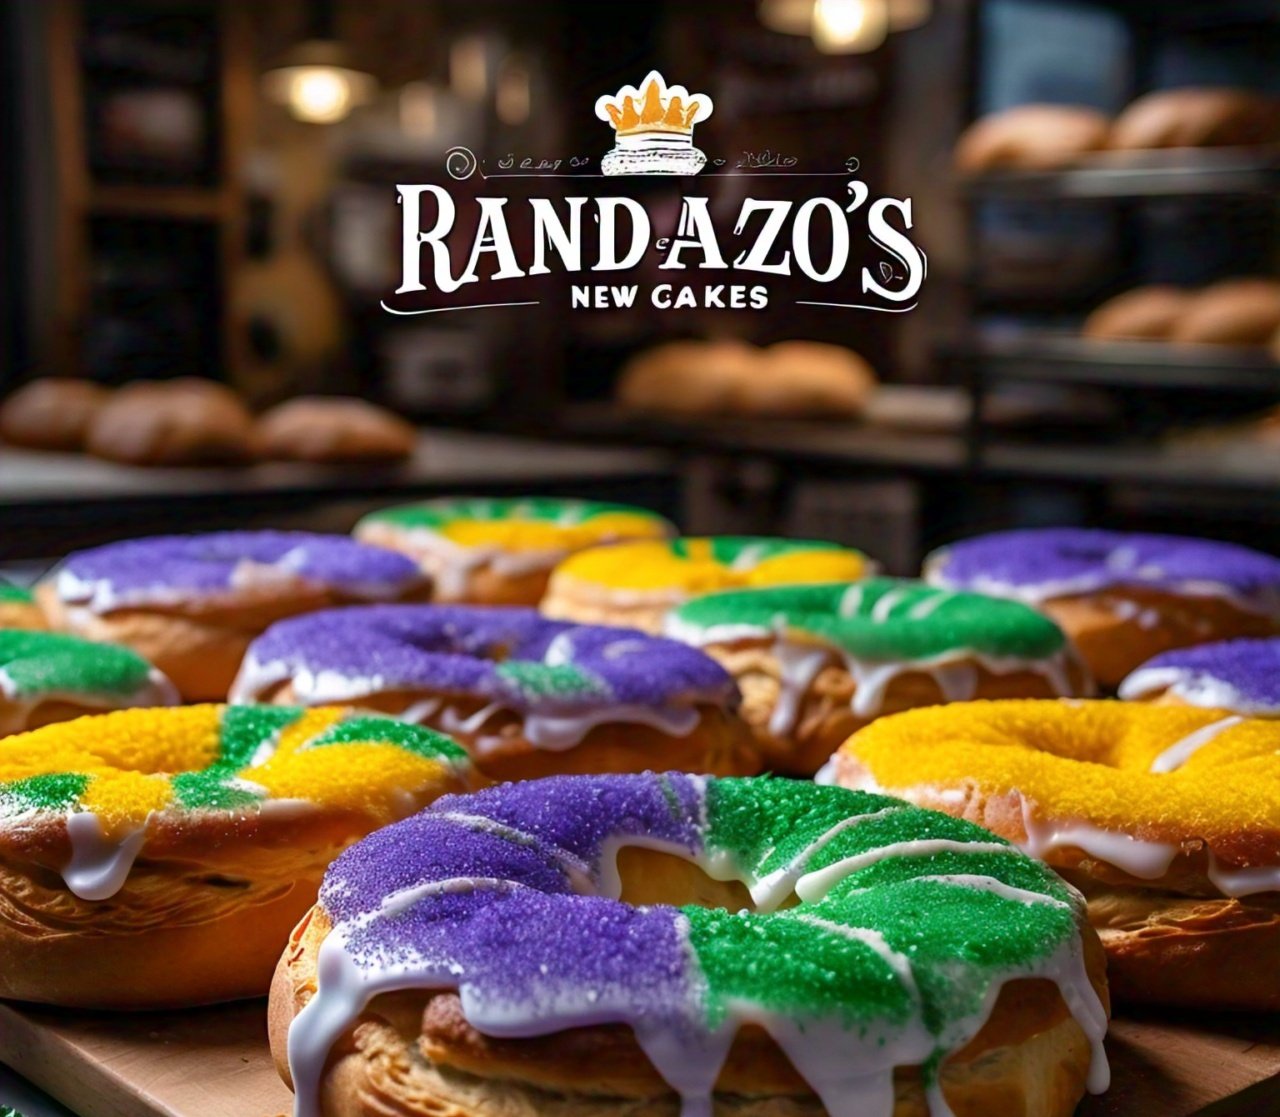 Randazzo King Cake: Discover 5 Delicious Reasons to Love This New Orleans Classic